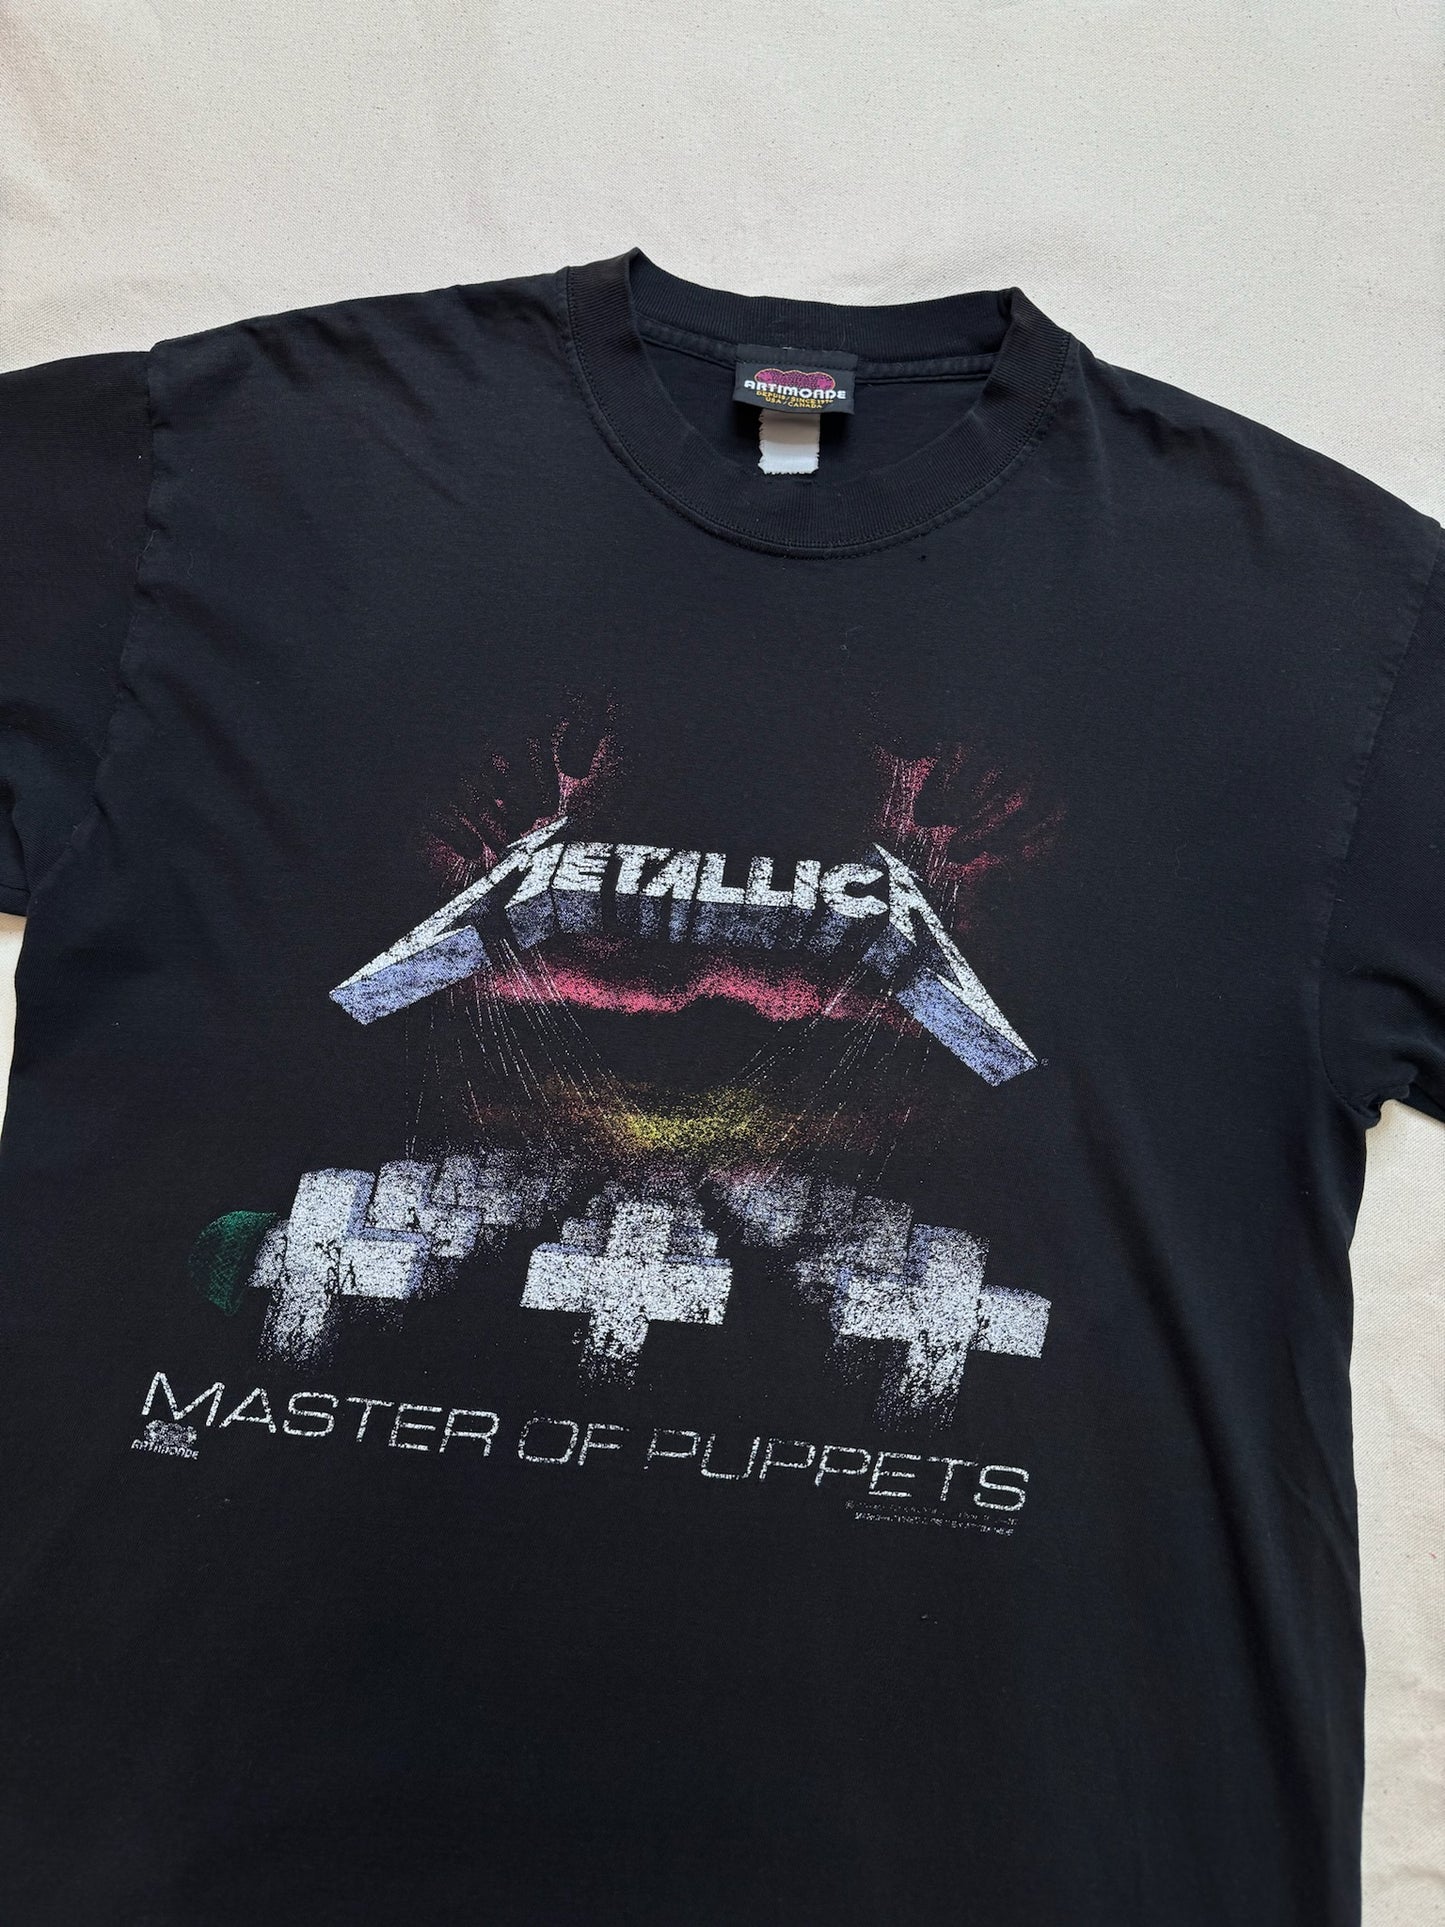 Vintage 1997 Master of Puppets Metallica Tee Size L